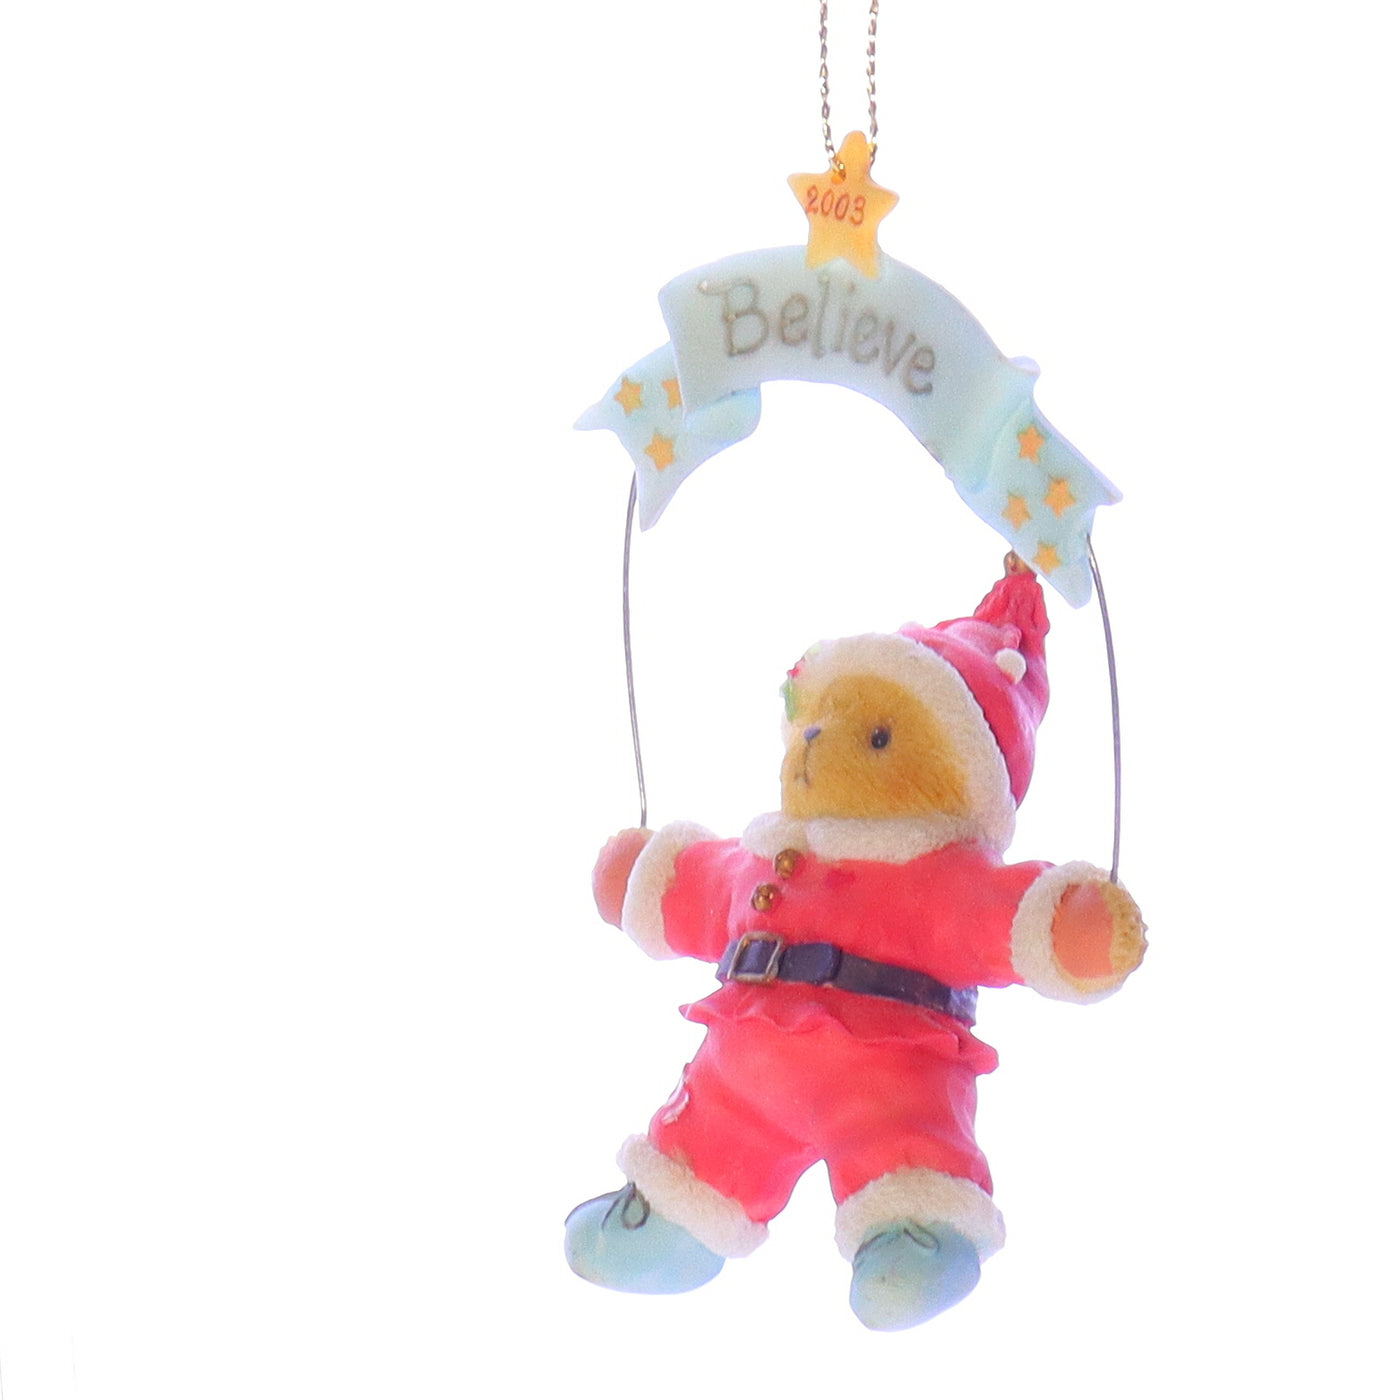 Cherished_Teddies_112392_Believe_Christmas_Ornament_2003 Front Left View